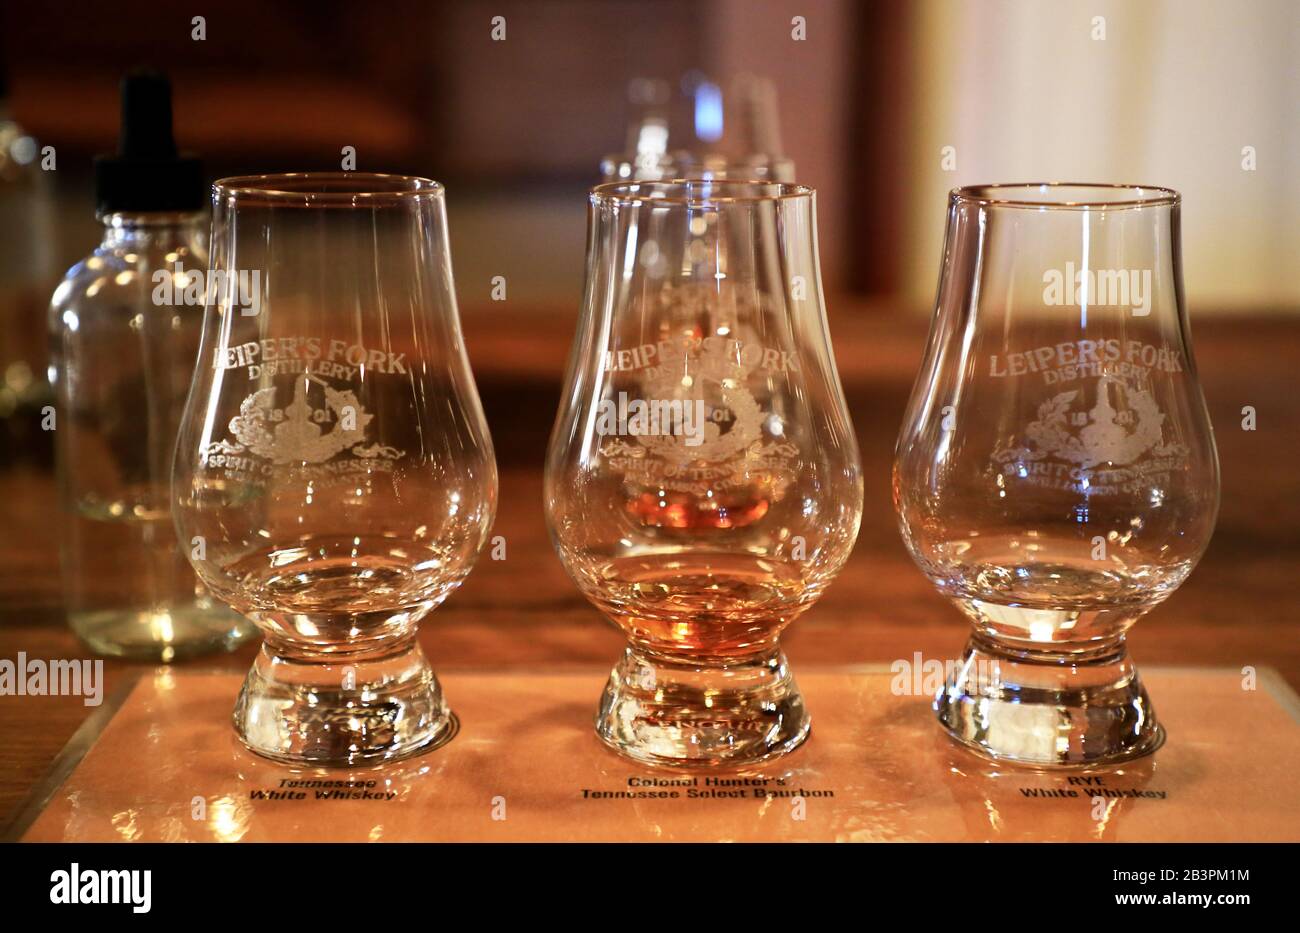 Tasting glasses contain whiskey on the table of tasting room of Leiper's Fork Distillery.Franklin.Tennessee.USA Stock Photo